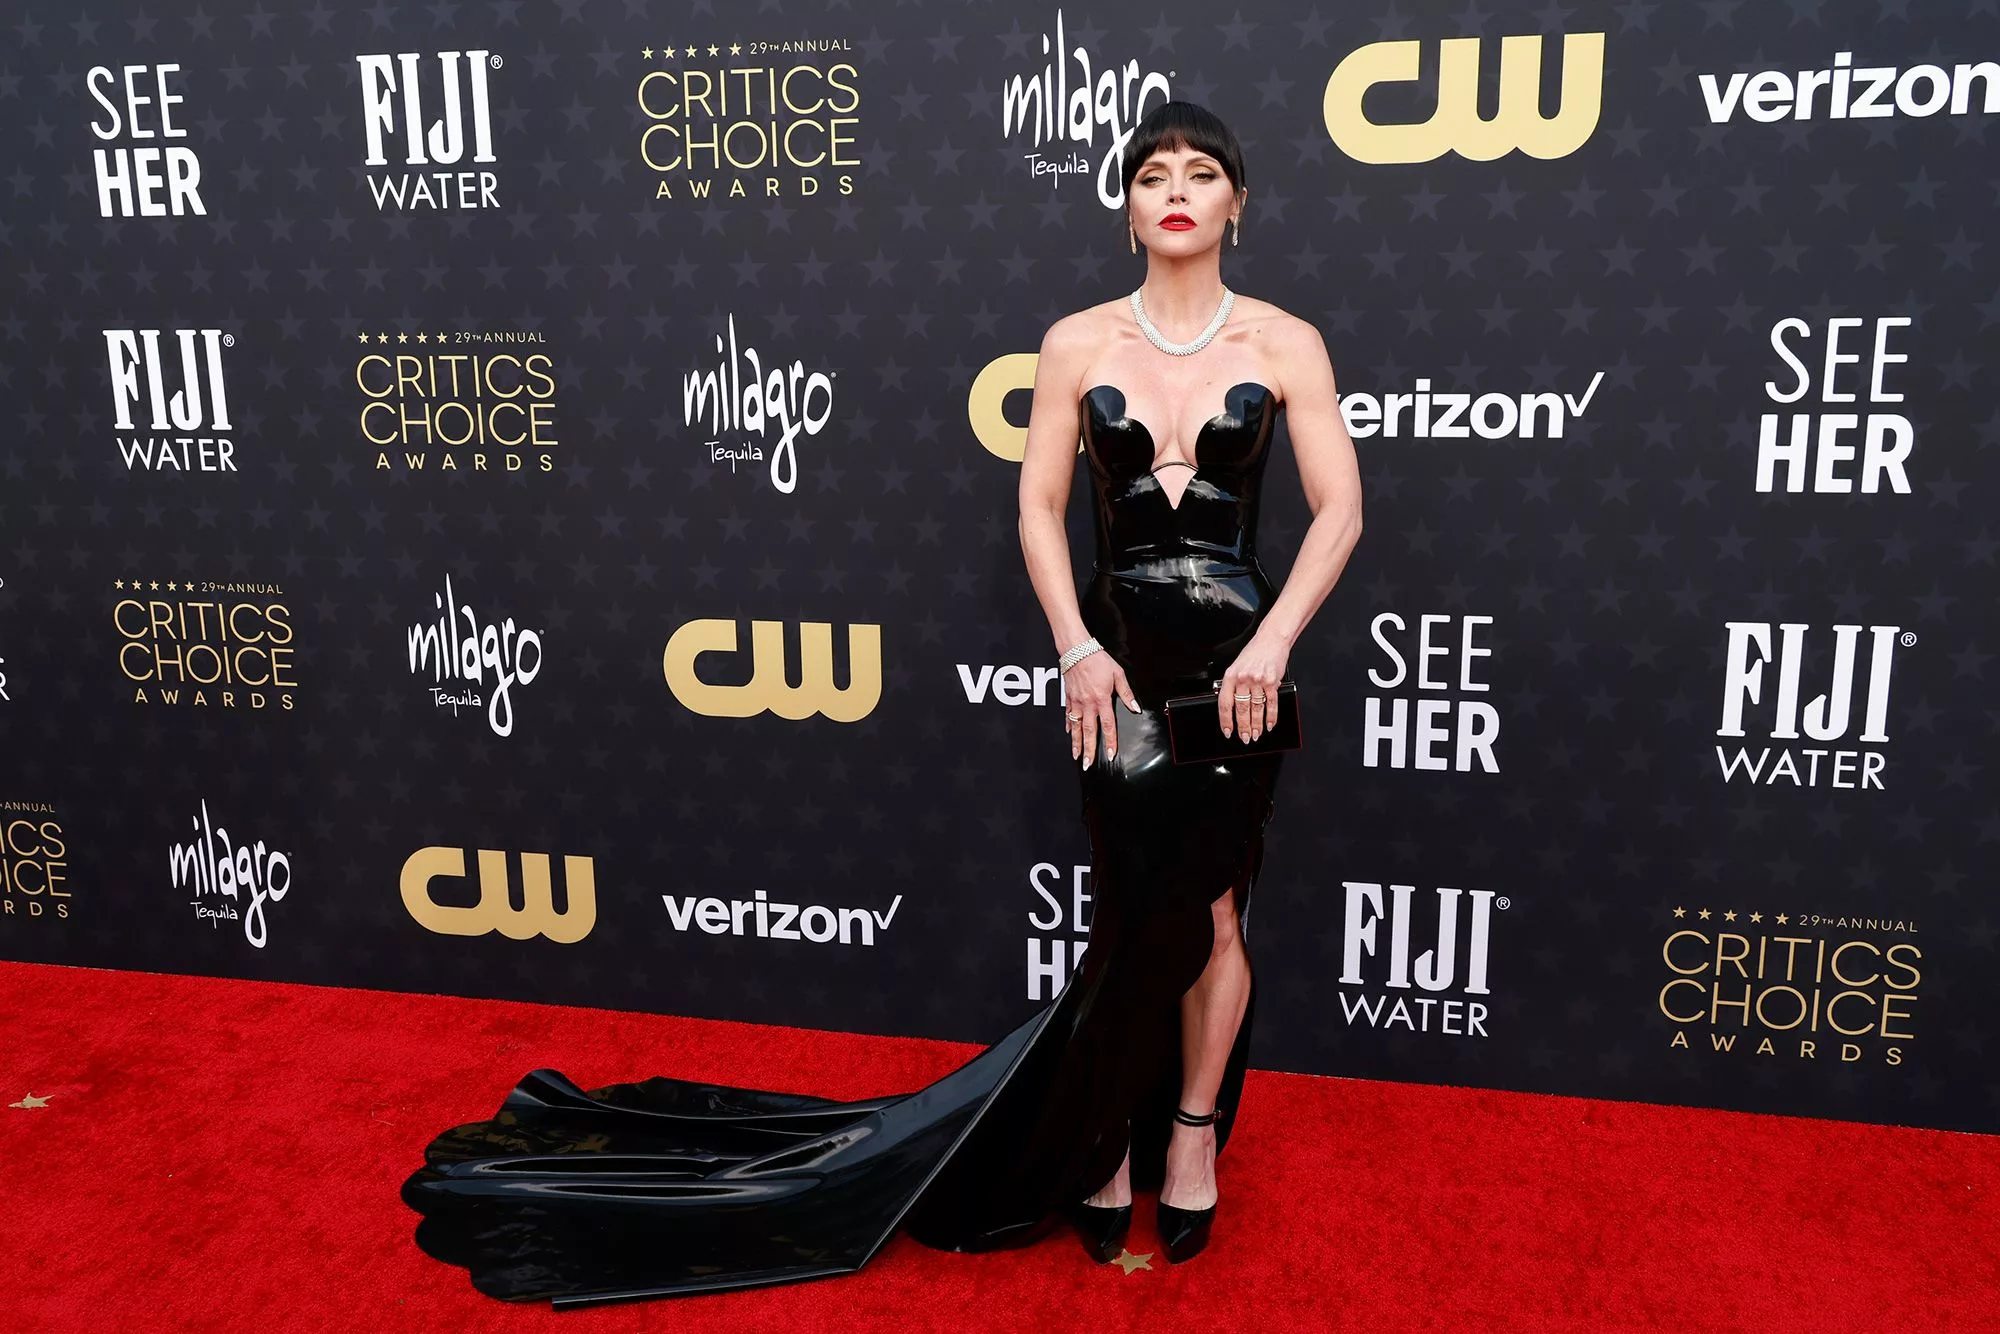 Christina Ricci channeled Morticia Addams with a black latex Atsuko Kudo dress with deep sweetheart neck. She completed the look with a Carolina Herrera clutch and diamond jewelry by Bucherer.